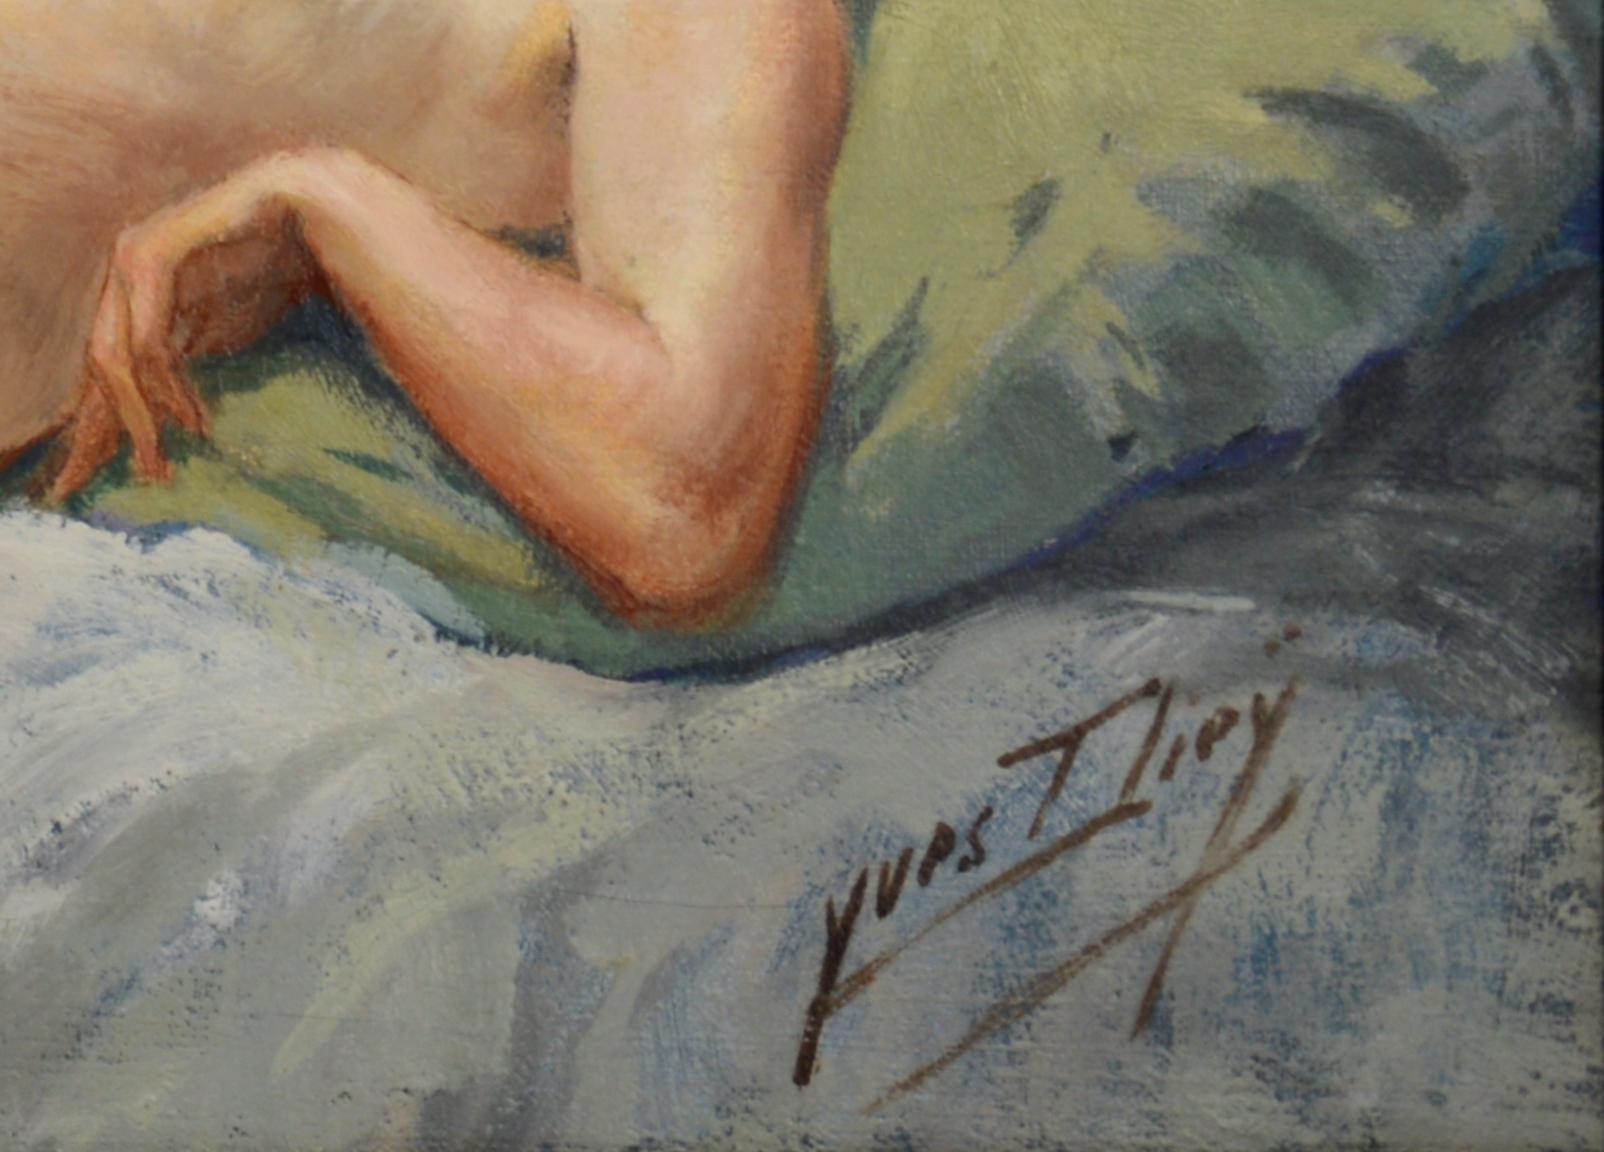 Oil on canvas by Yves DIEY (1892-1984), France. The Nude. With frame : 99x54 cm - 39x21.25 inches ; without frame : 90x45 cm - 35.4x17.7 inches. Signed 